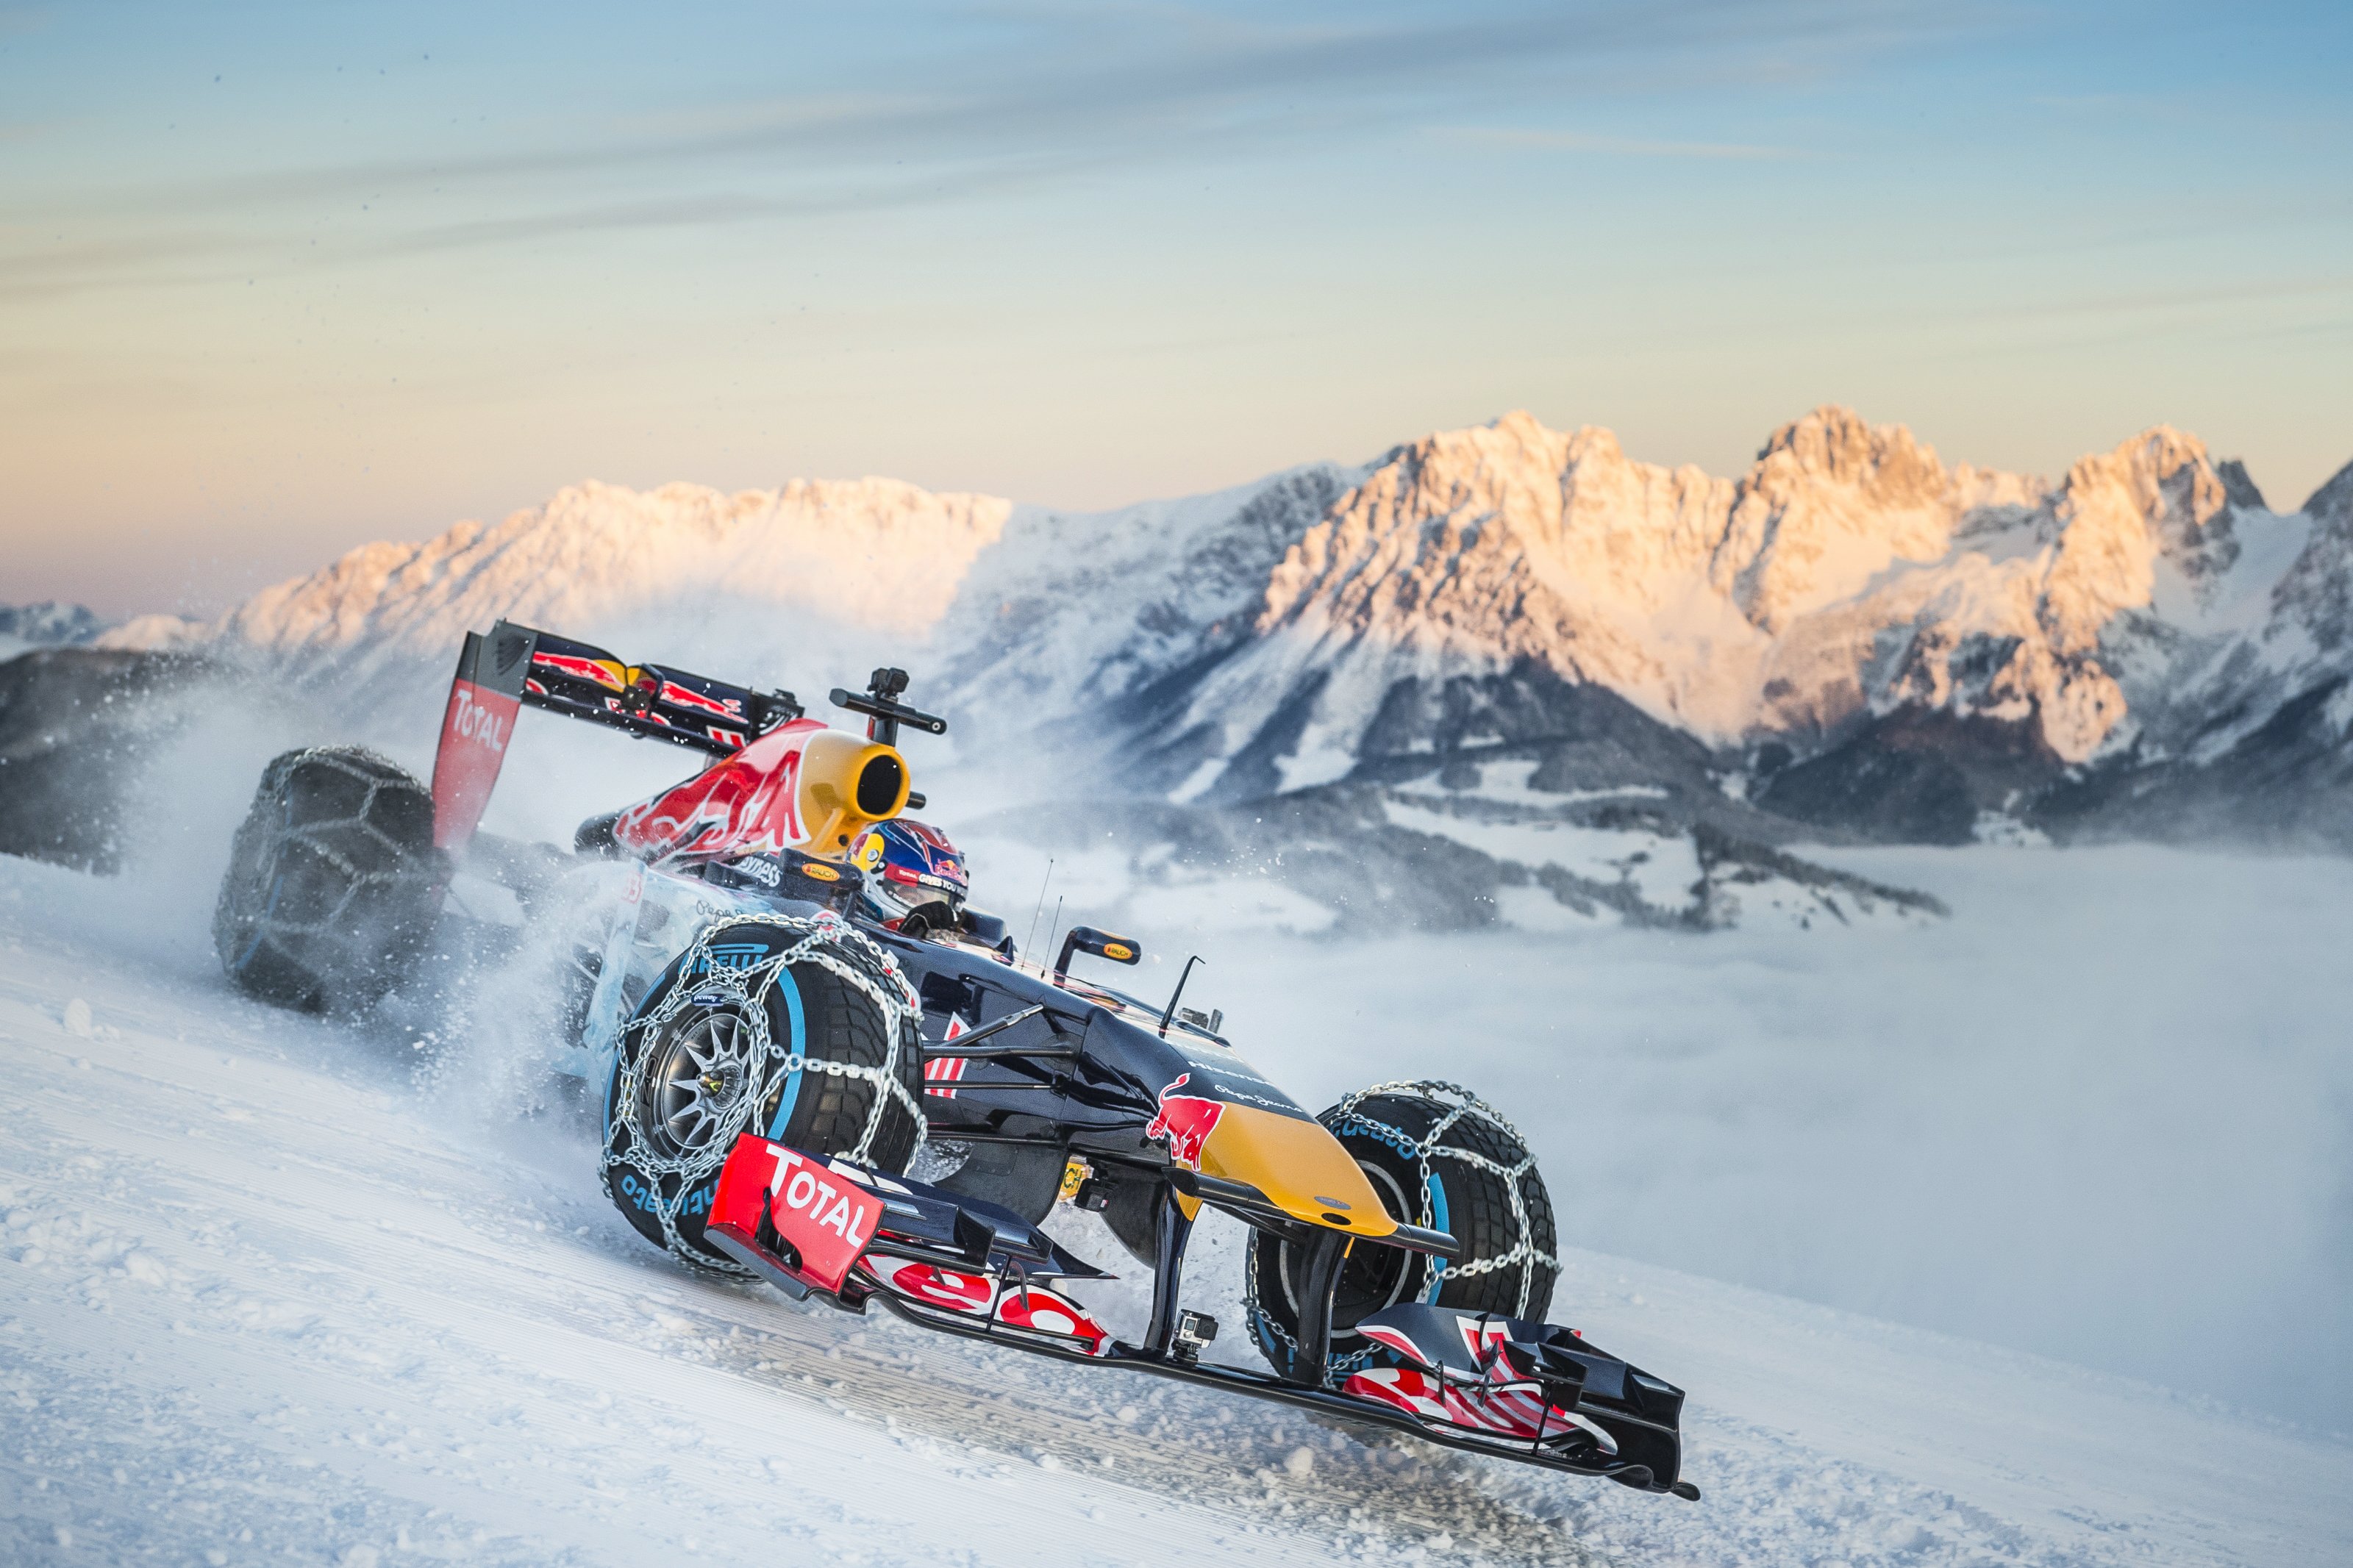 2022/05/a-fine-of-up-to-30000-could-be-coming-red-bulls-way-for-the-f1-snow-event-video-photo-gallery-8